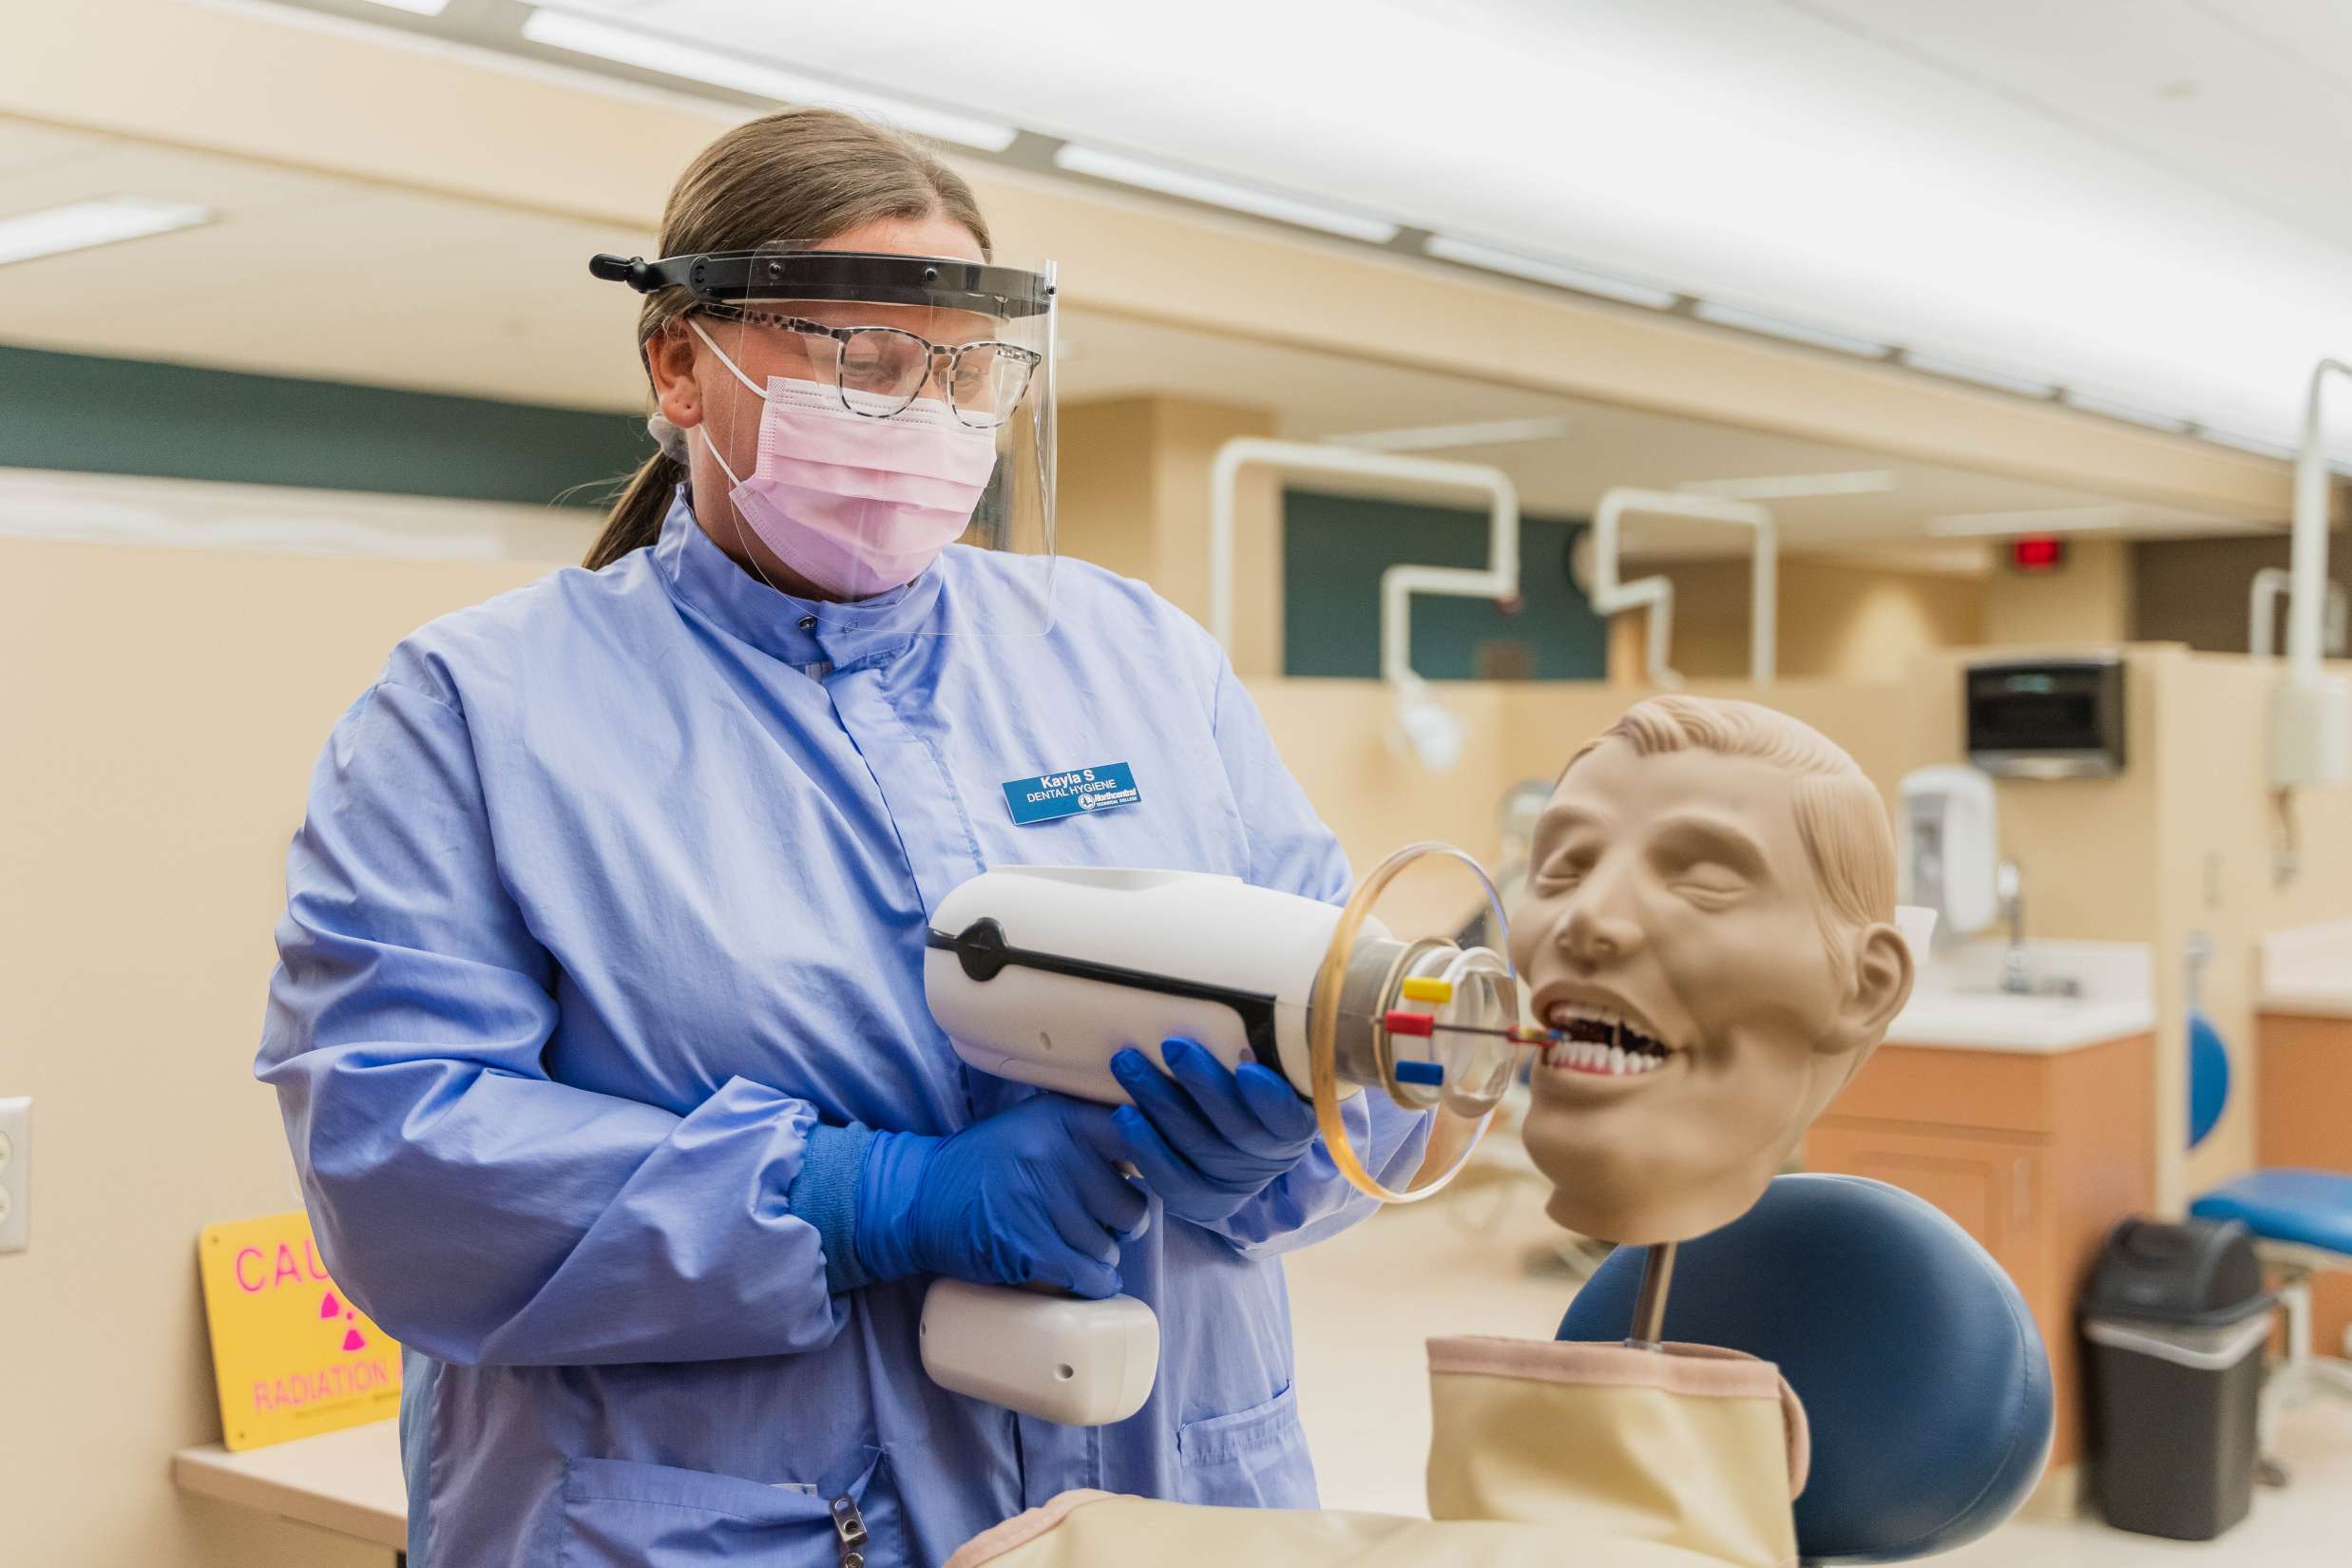 A dental hygienist performs procedures on a mannequin head positioned upright in a procedure room chair.